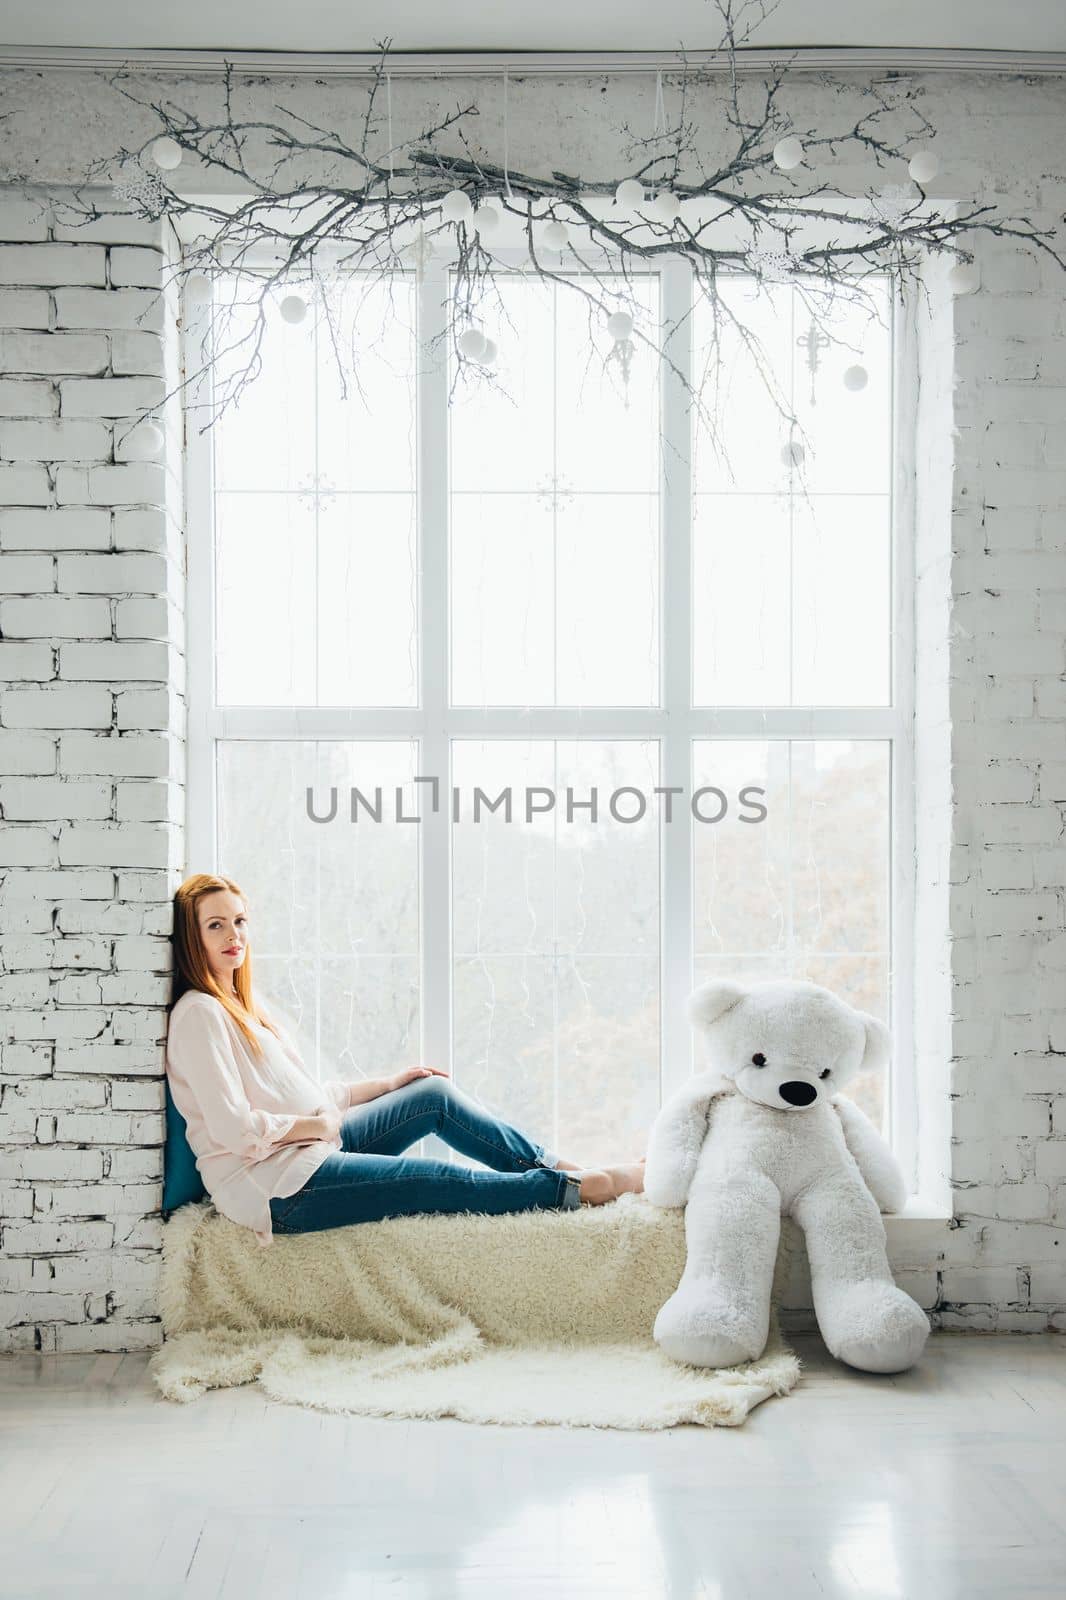 red-haired pregnant girl in a light blouse and blue jeans with a teddy bear on the window